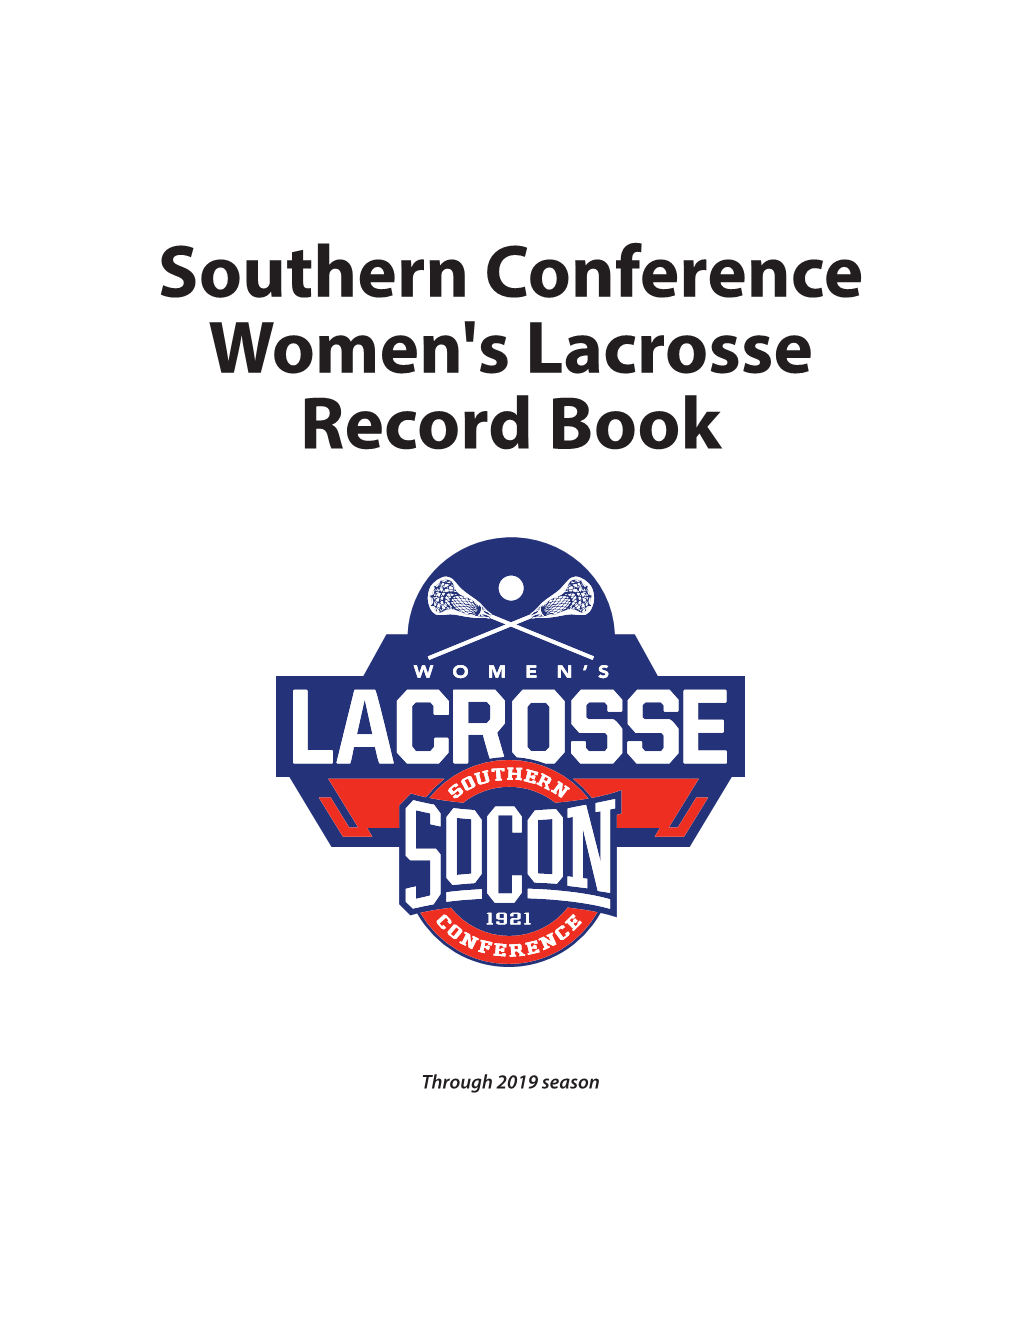 Southern Conference Women's Lacrosse Record Book